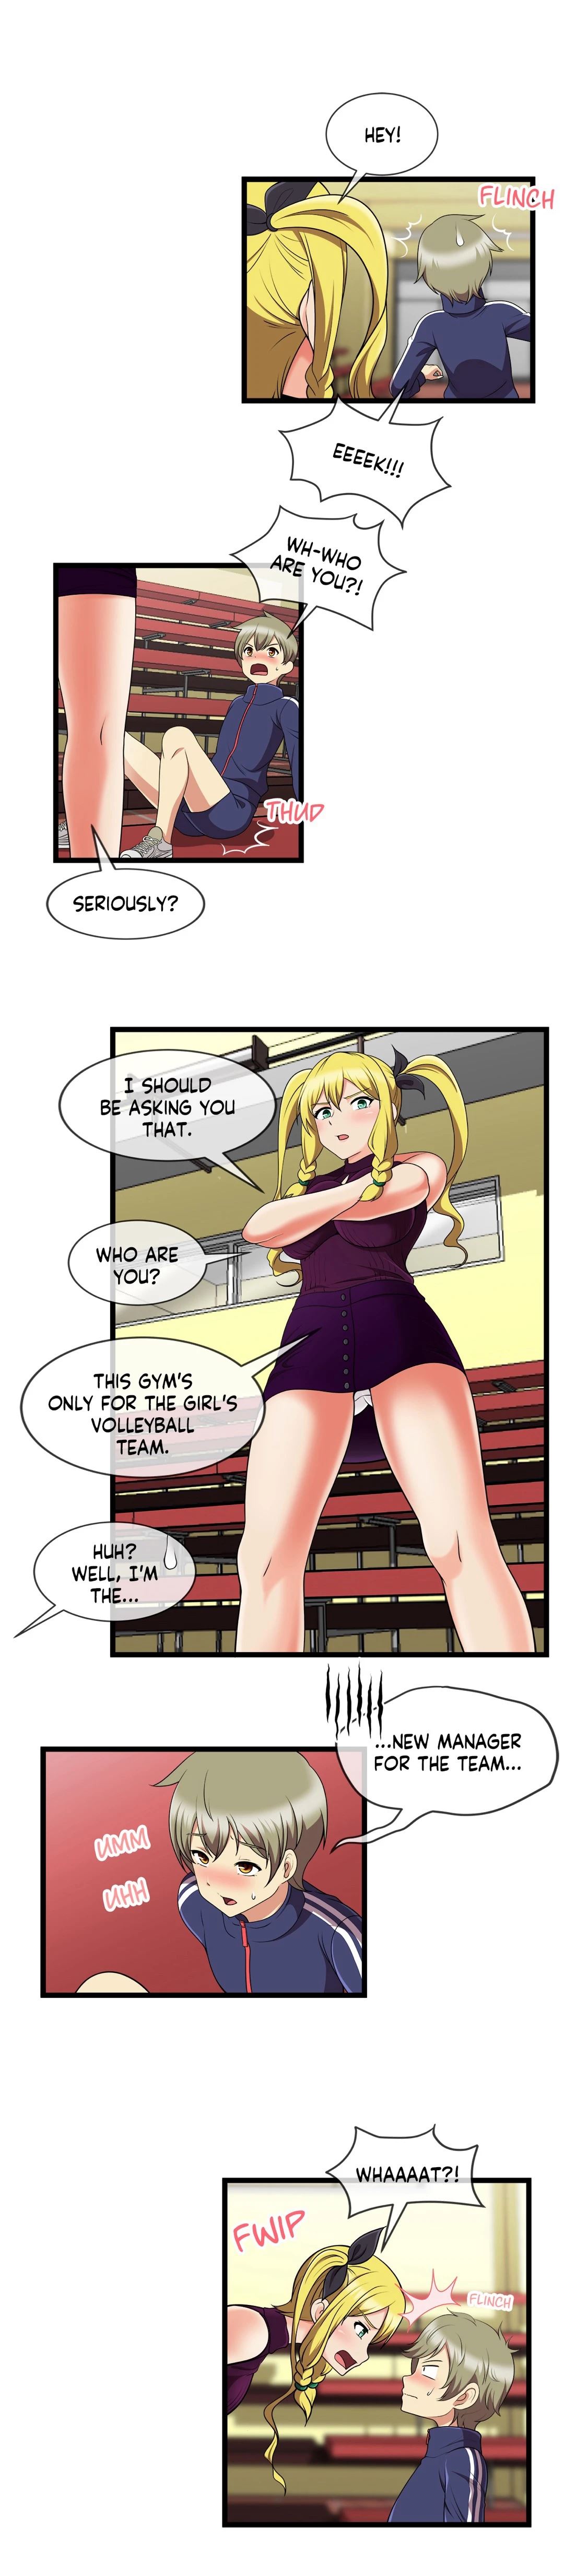 Xem ảnh The Naughty Volleyball Team Raw - Chapter 12 - 069855ae8333a9ce83 - Hentai24h.Tv